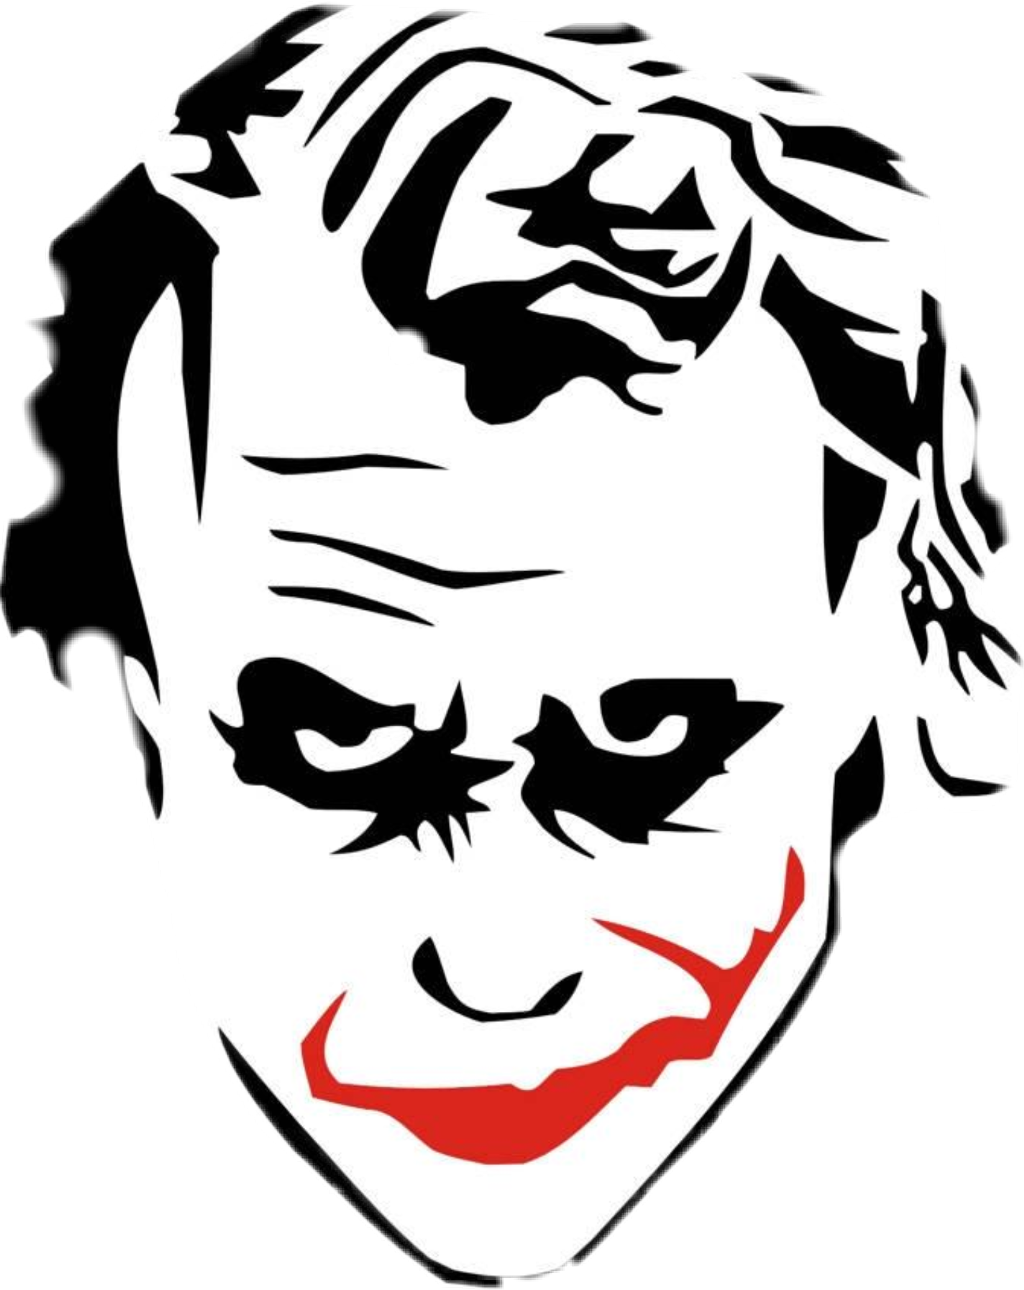 Joker Sticker Joker Stickers For Bikes Clipart Large Size Png Image Pikpng